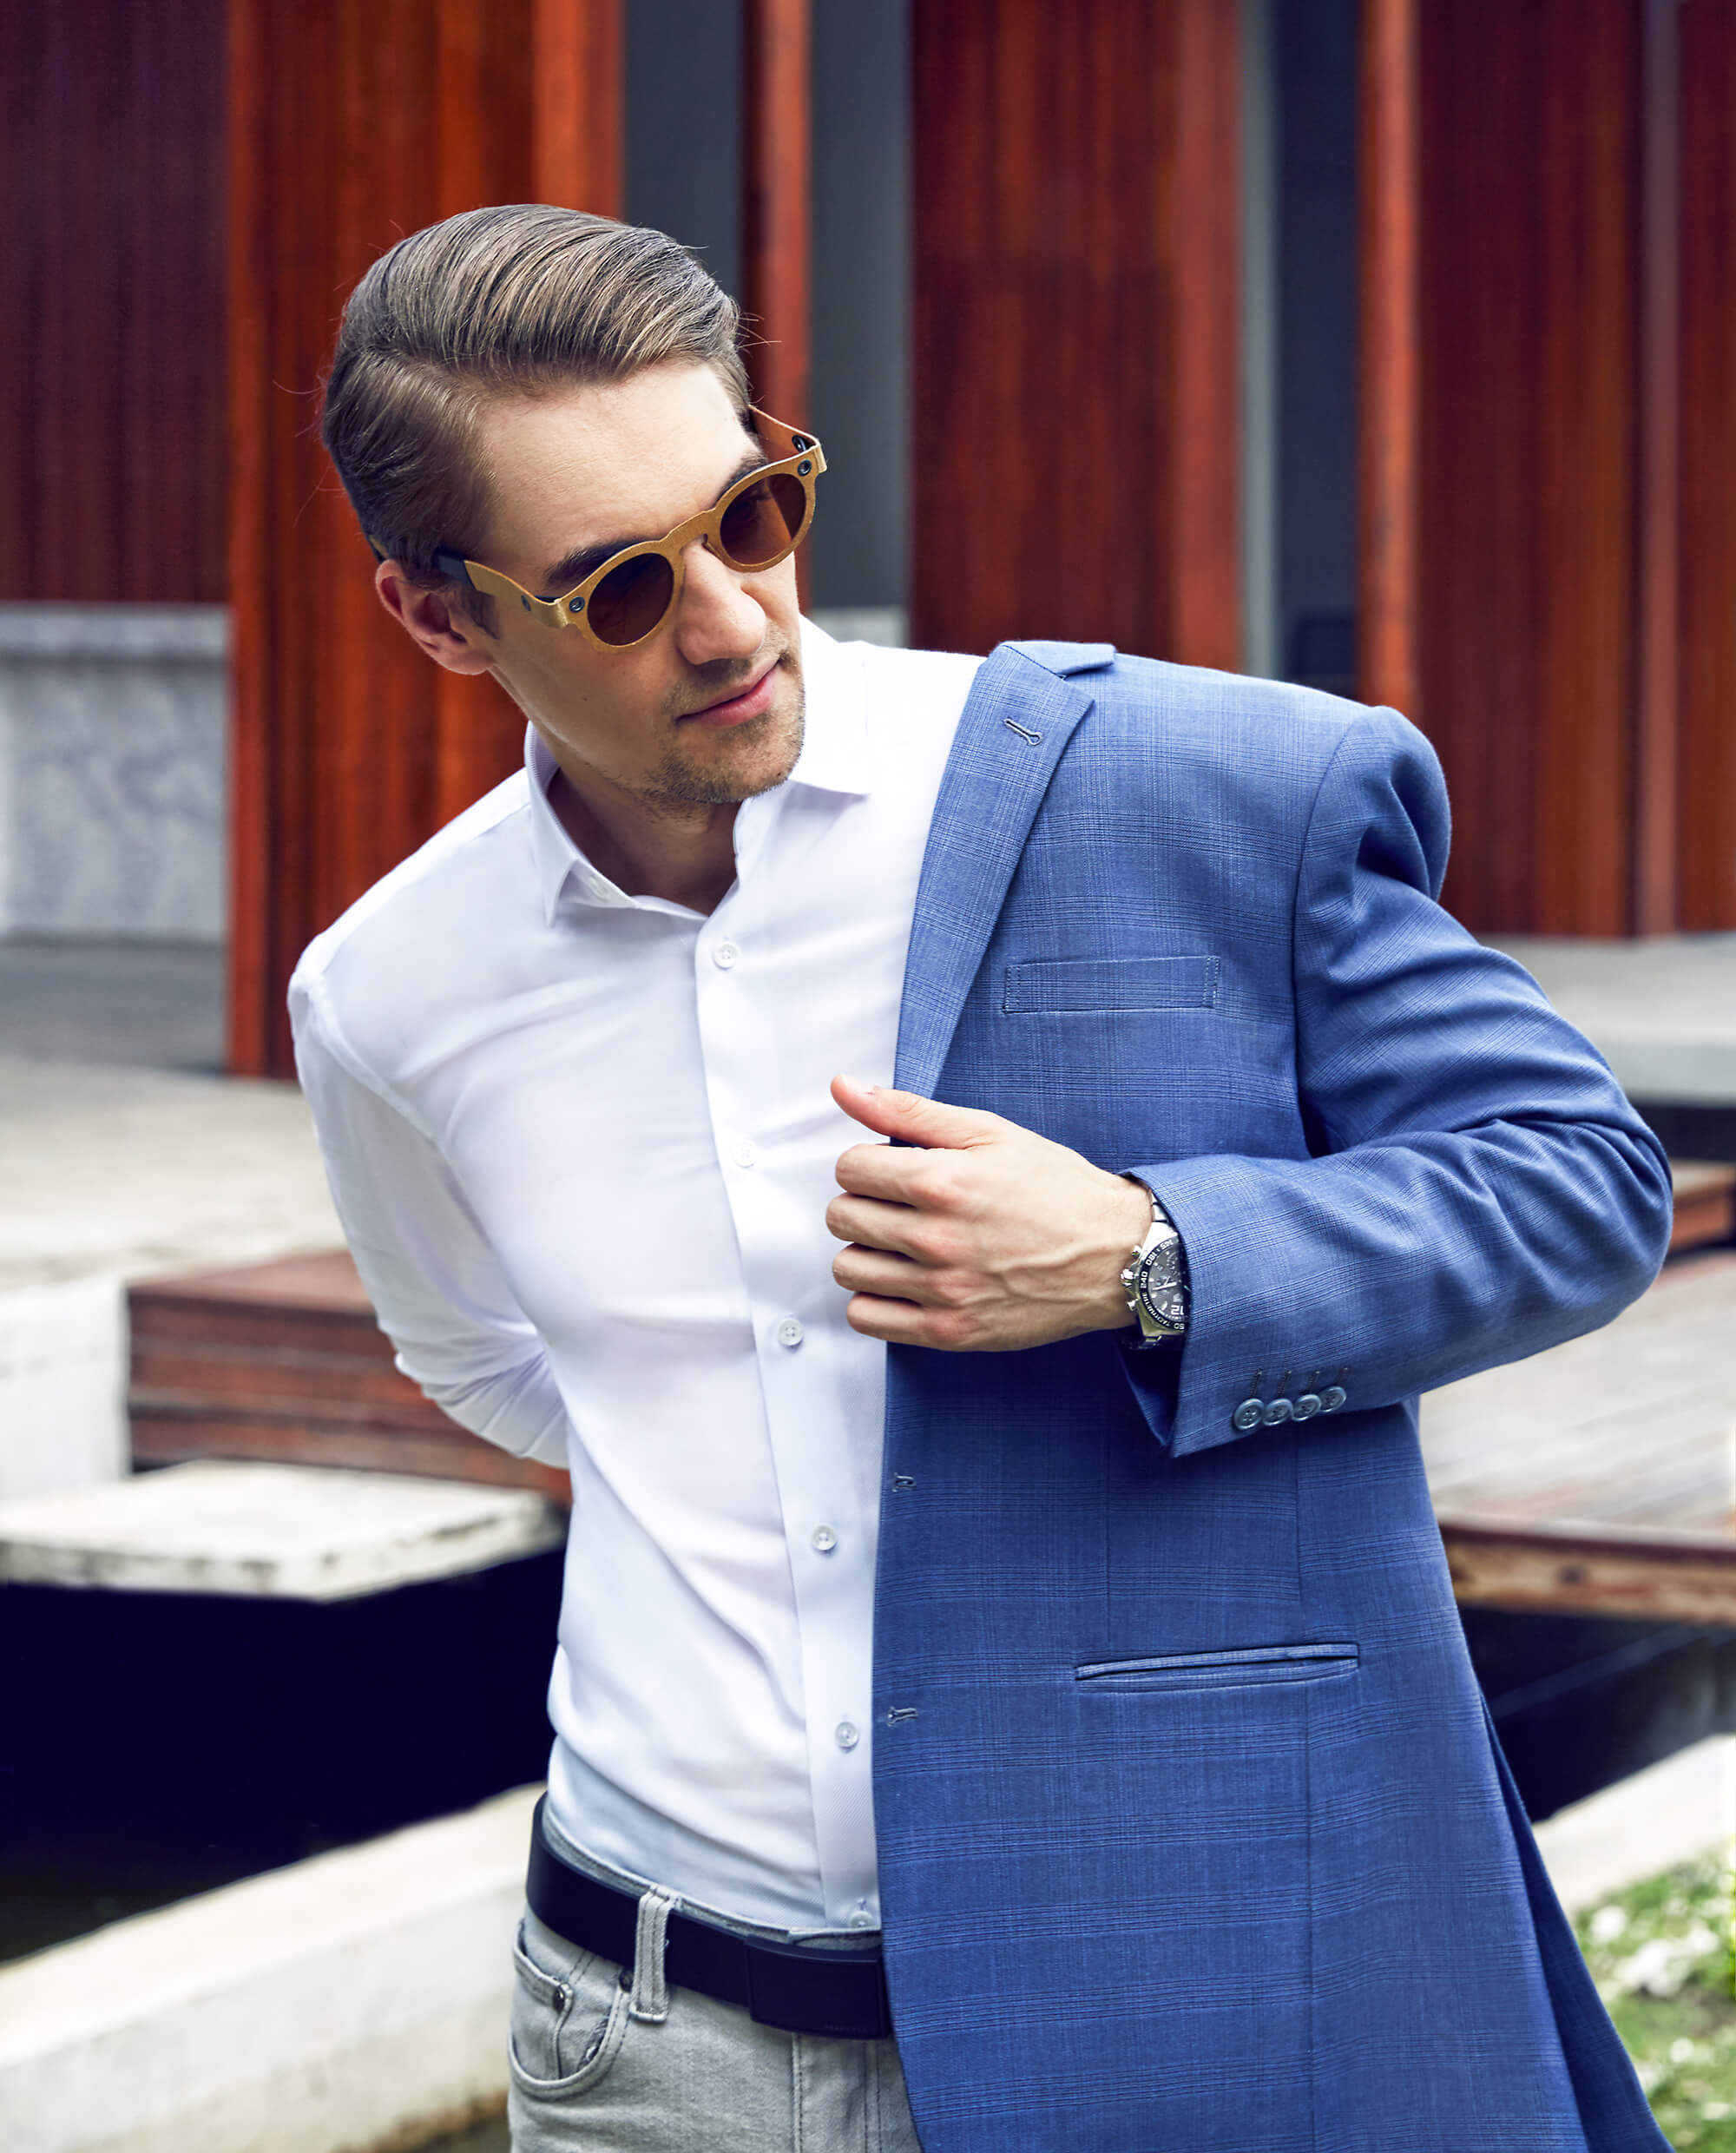 White man with sunglasses wearing a white shirt and a made to fit light blue jacket